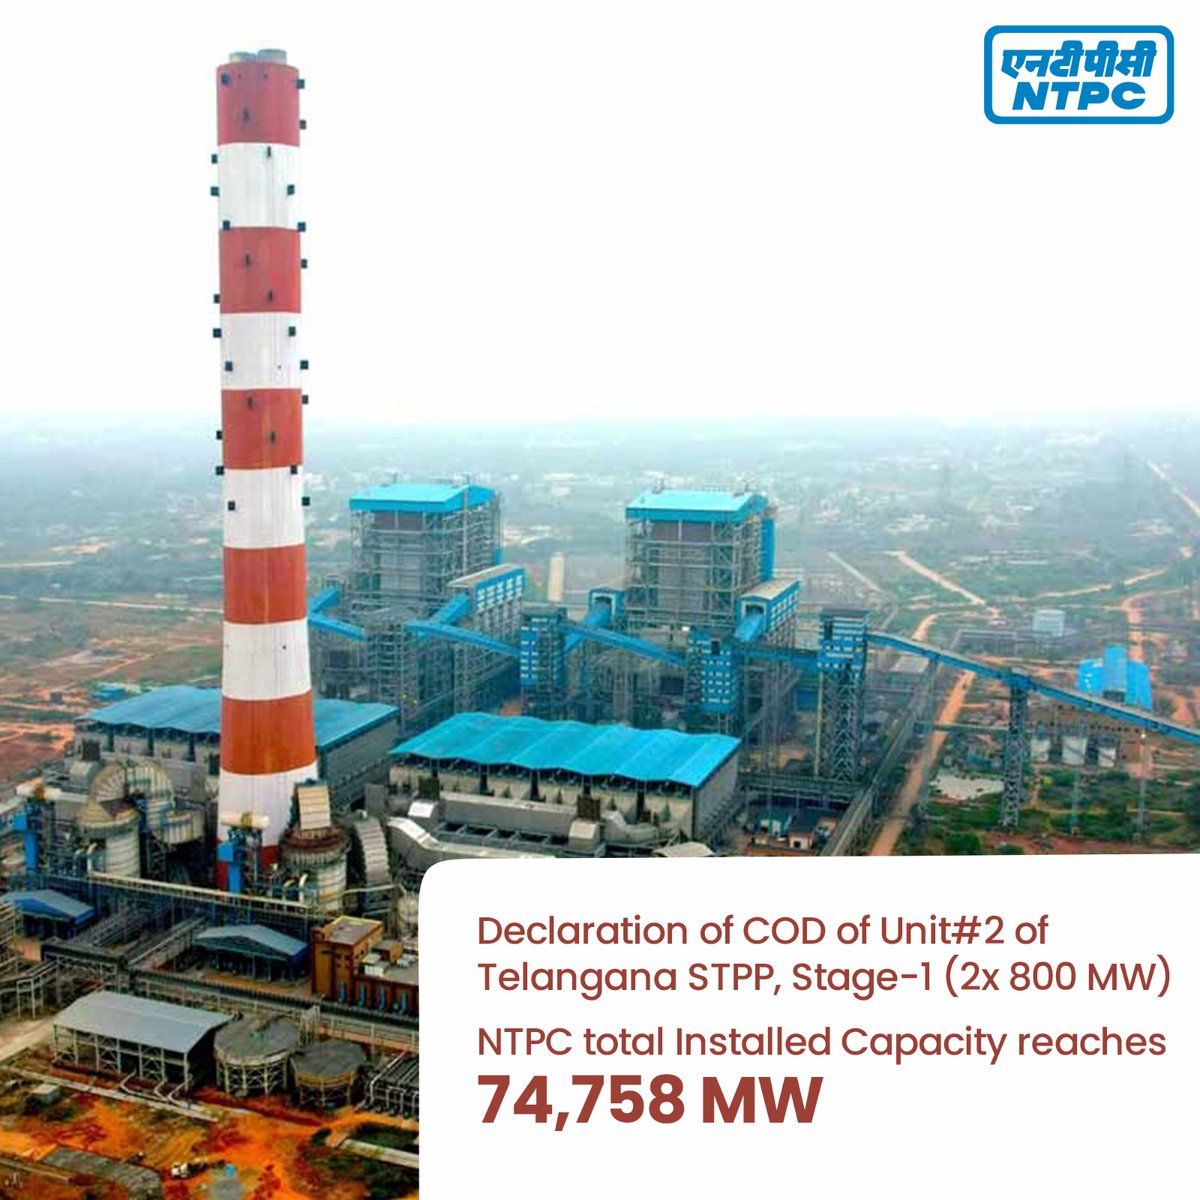 Unit#2 (800 MW) of Telangana STPP, Stage-I (2x800 MW) is declared on Commercial Operation w.e.f. 00:00 Hrs. of 01.03.2024. With this, the Group installed capacity of NTPC will become 74758 MW.
#EnergySecurity #EnergyForAll #PoweringProgressResponsibly #NTPC 

@MinOfPower